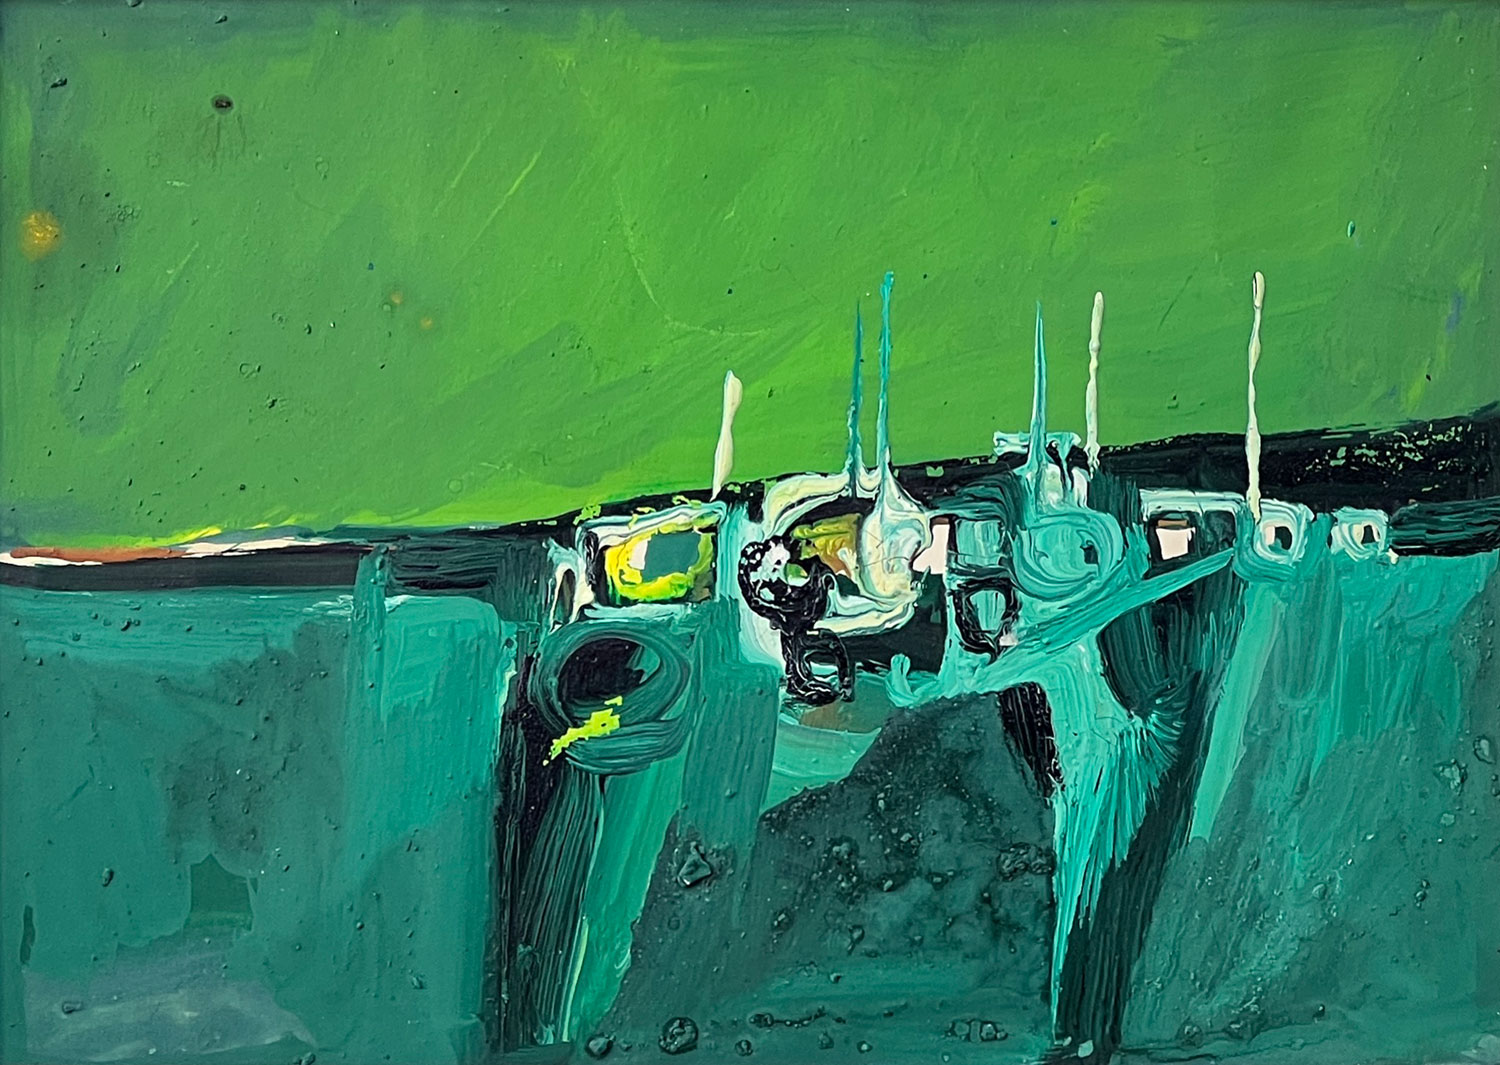 Peter Oliver - Green Seascape Original Painting for Sale